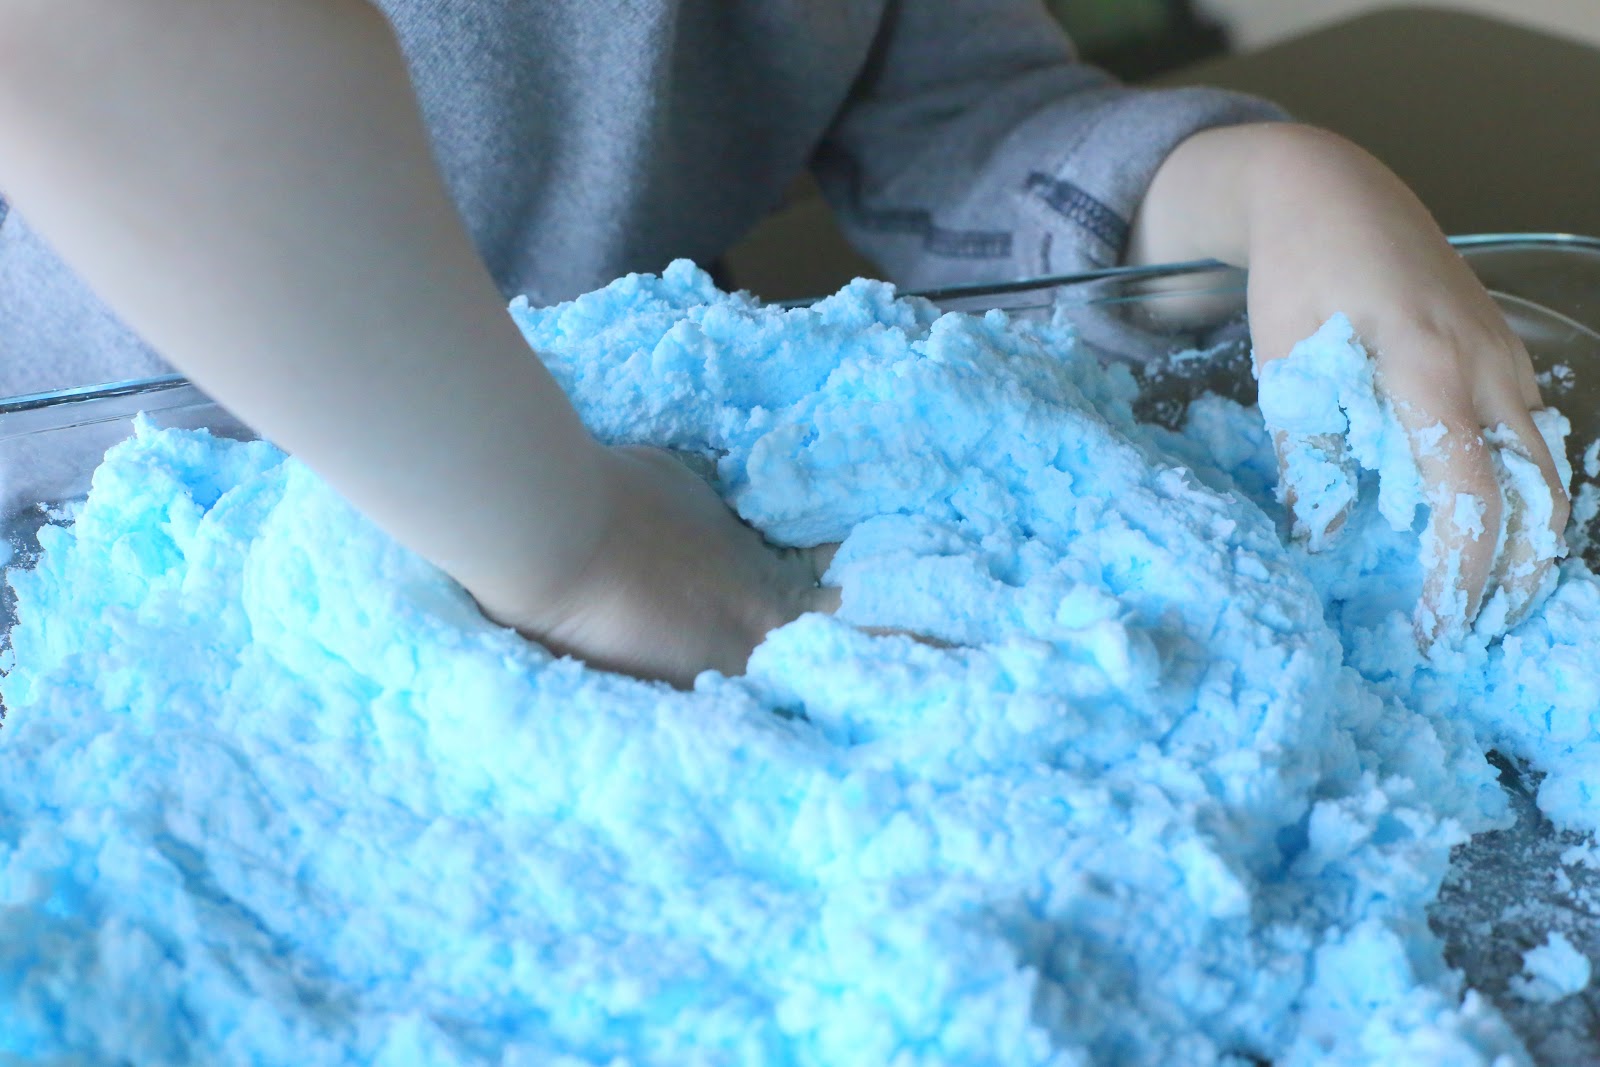 A new sensory play recipe for Magic Puffing Snow - it slowly puffs up and will even re-puff after it's been compressed.  From Fun at Home with Kids